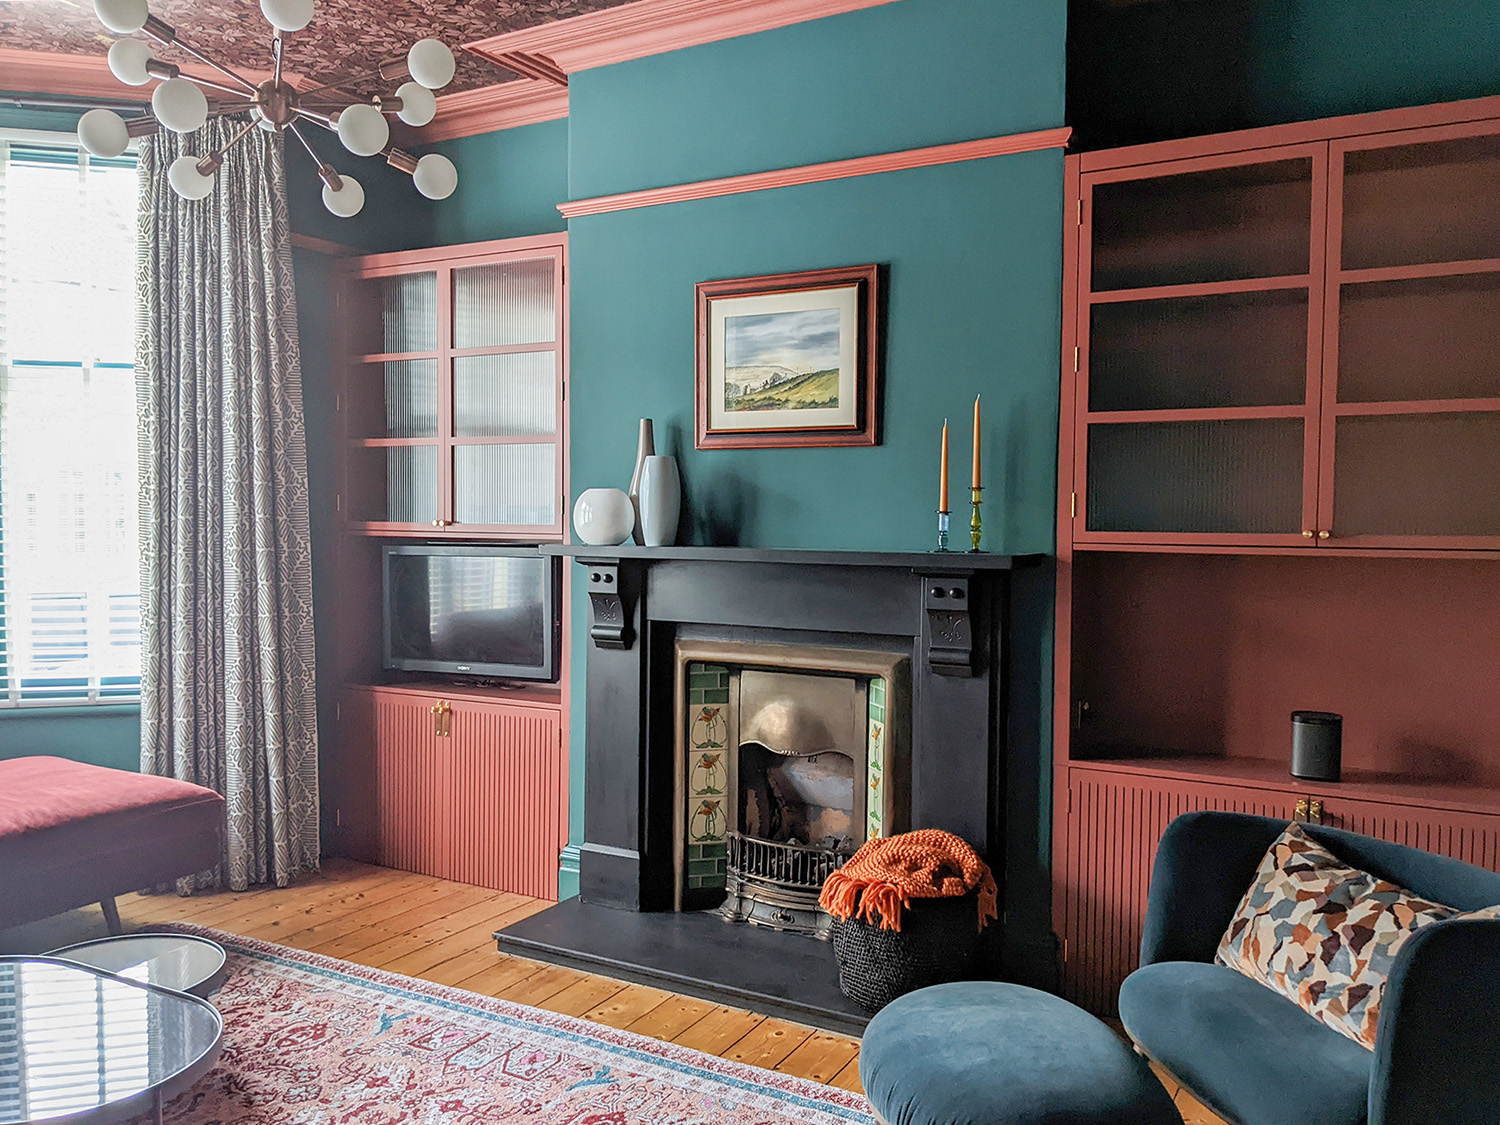 A photo showing the living room with dark teal walls and light red built in cabinets.